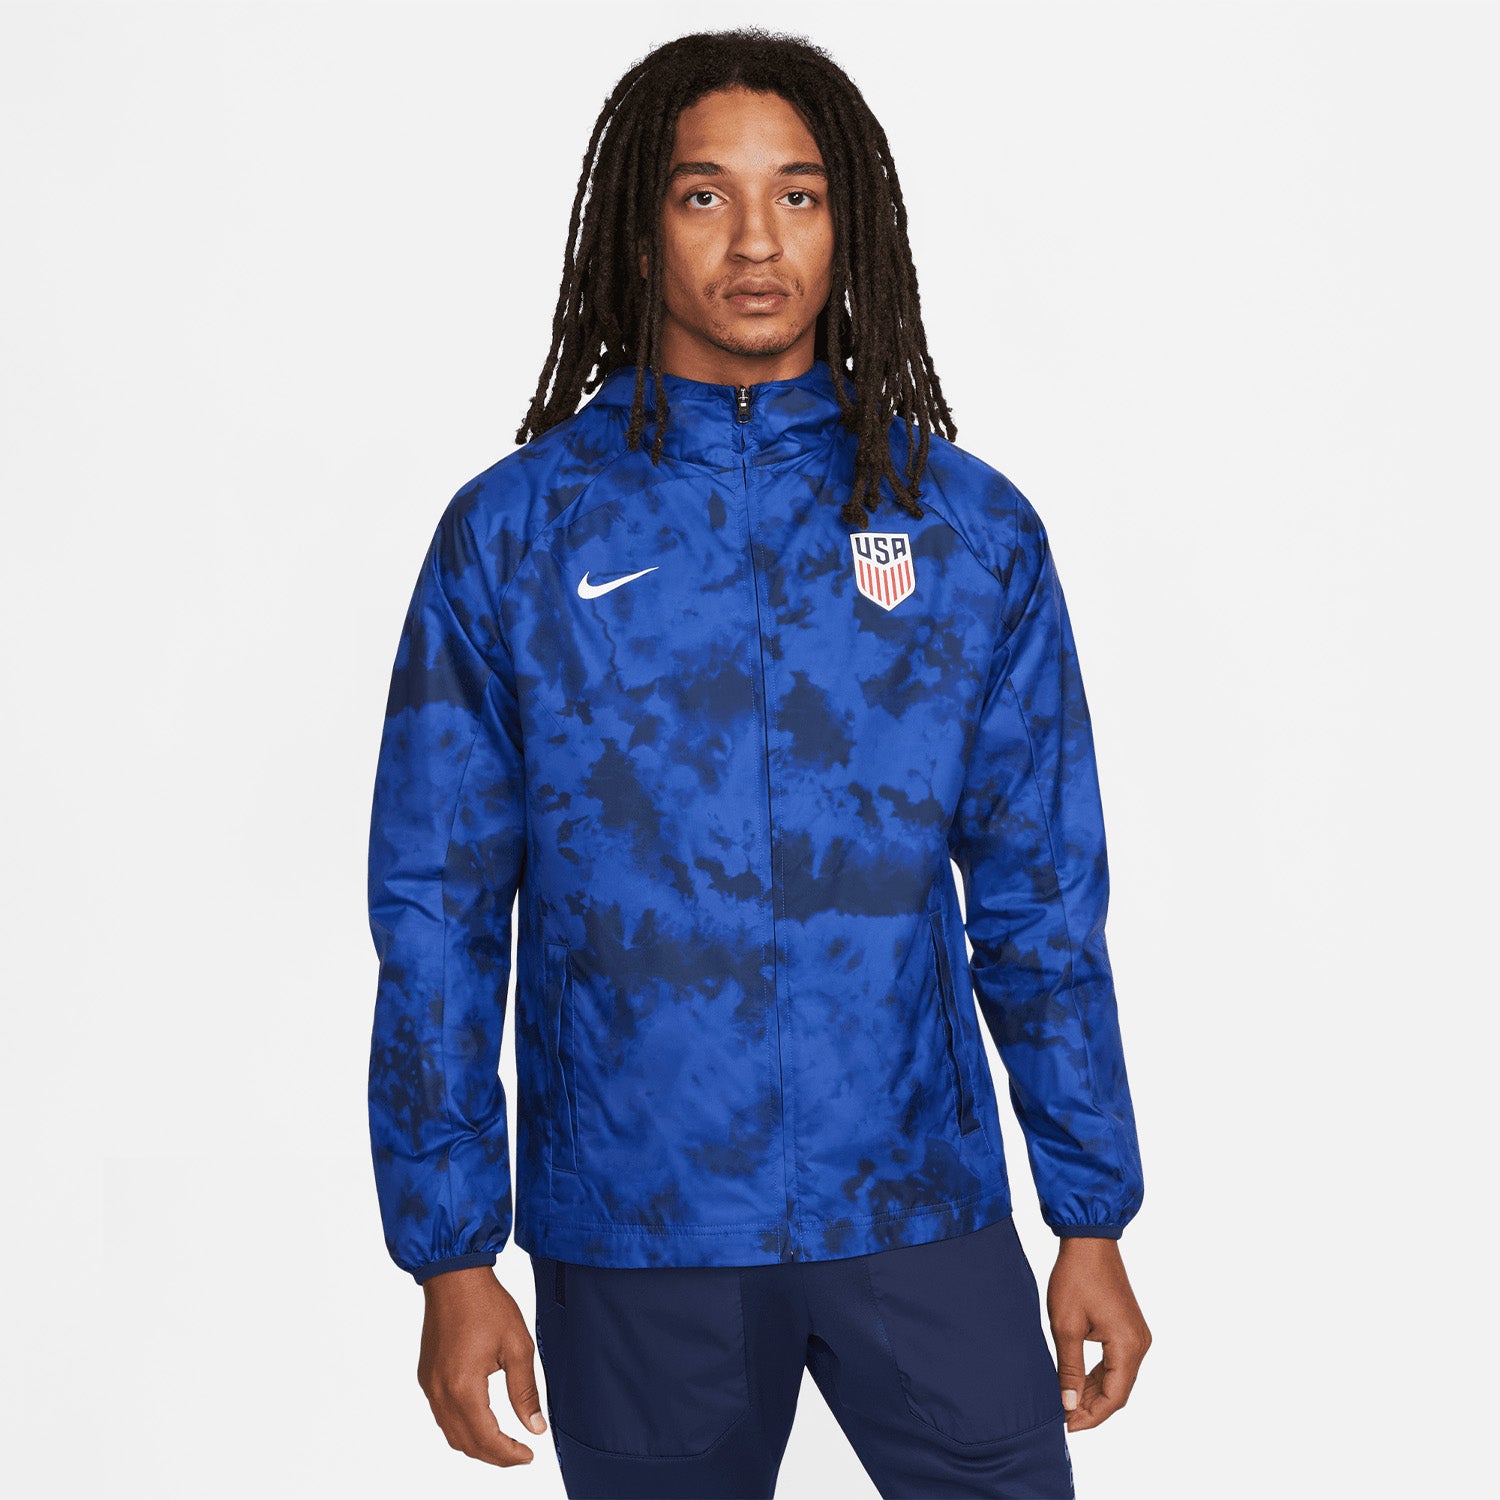 Men's Nike USA Zip Graphic Jacket - Official U.S. Soccer Store